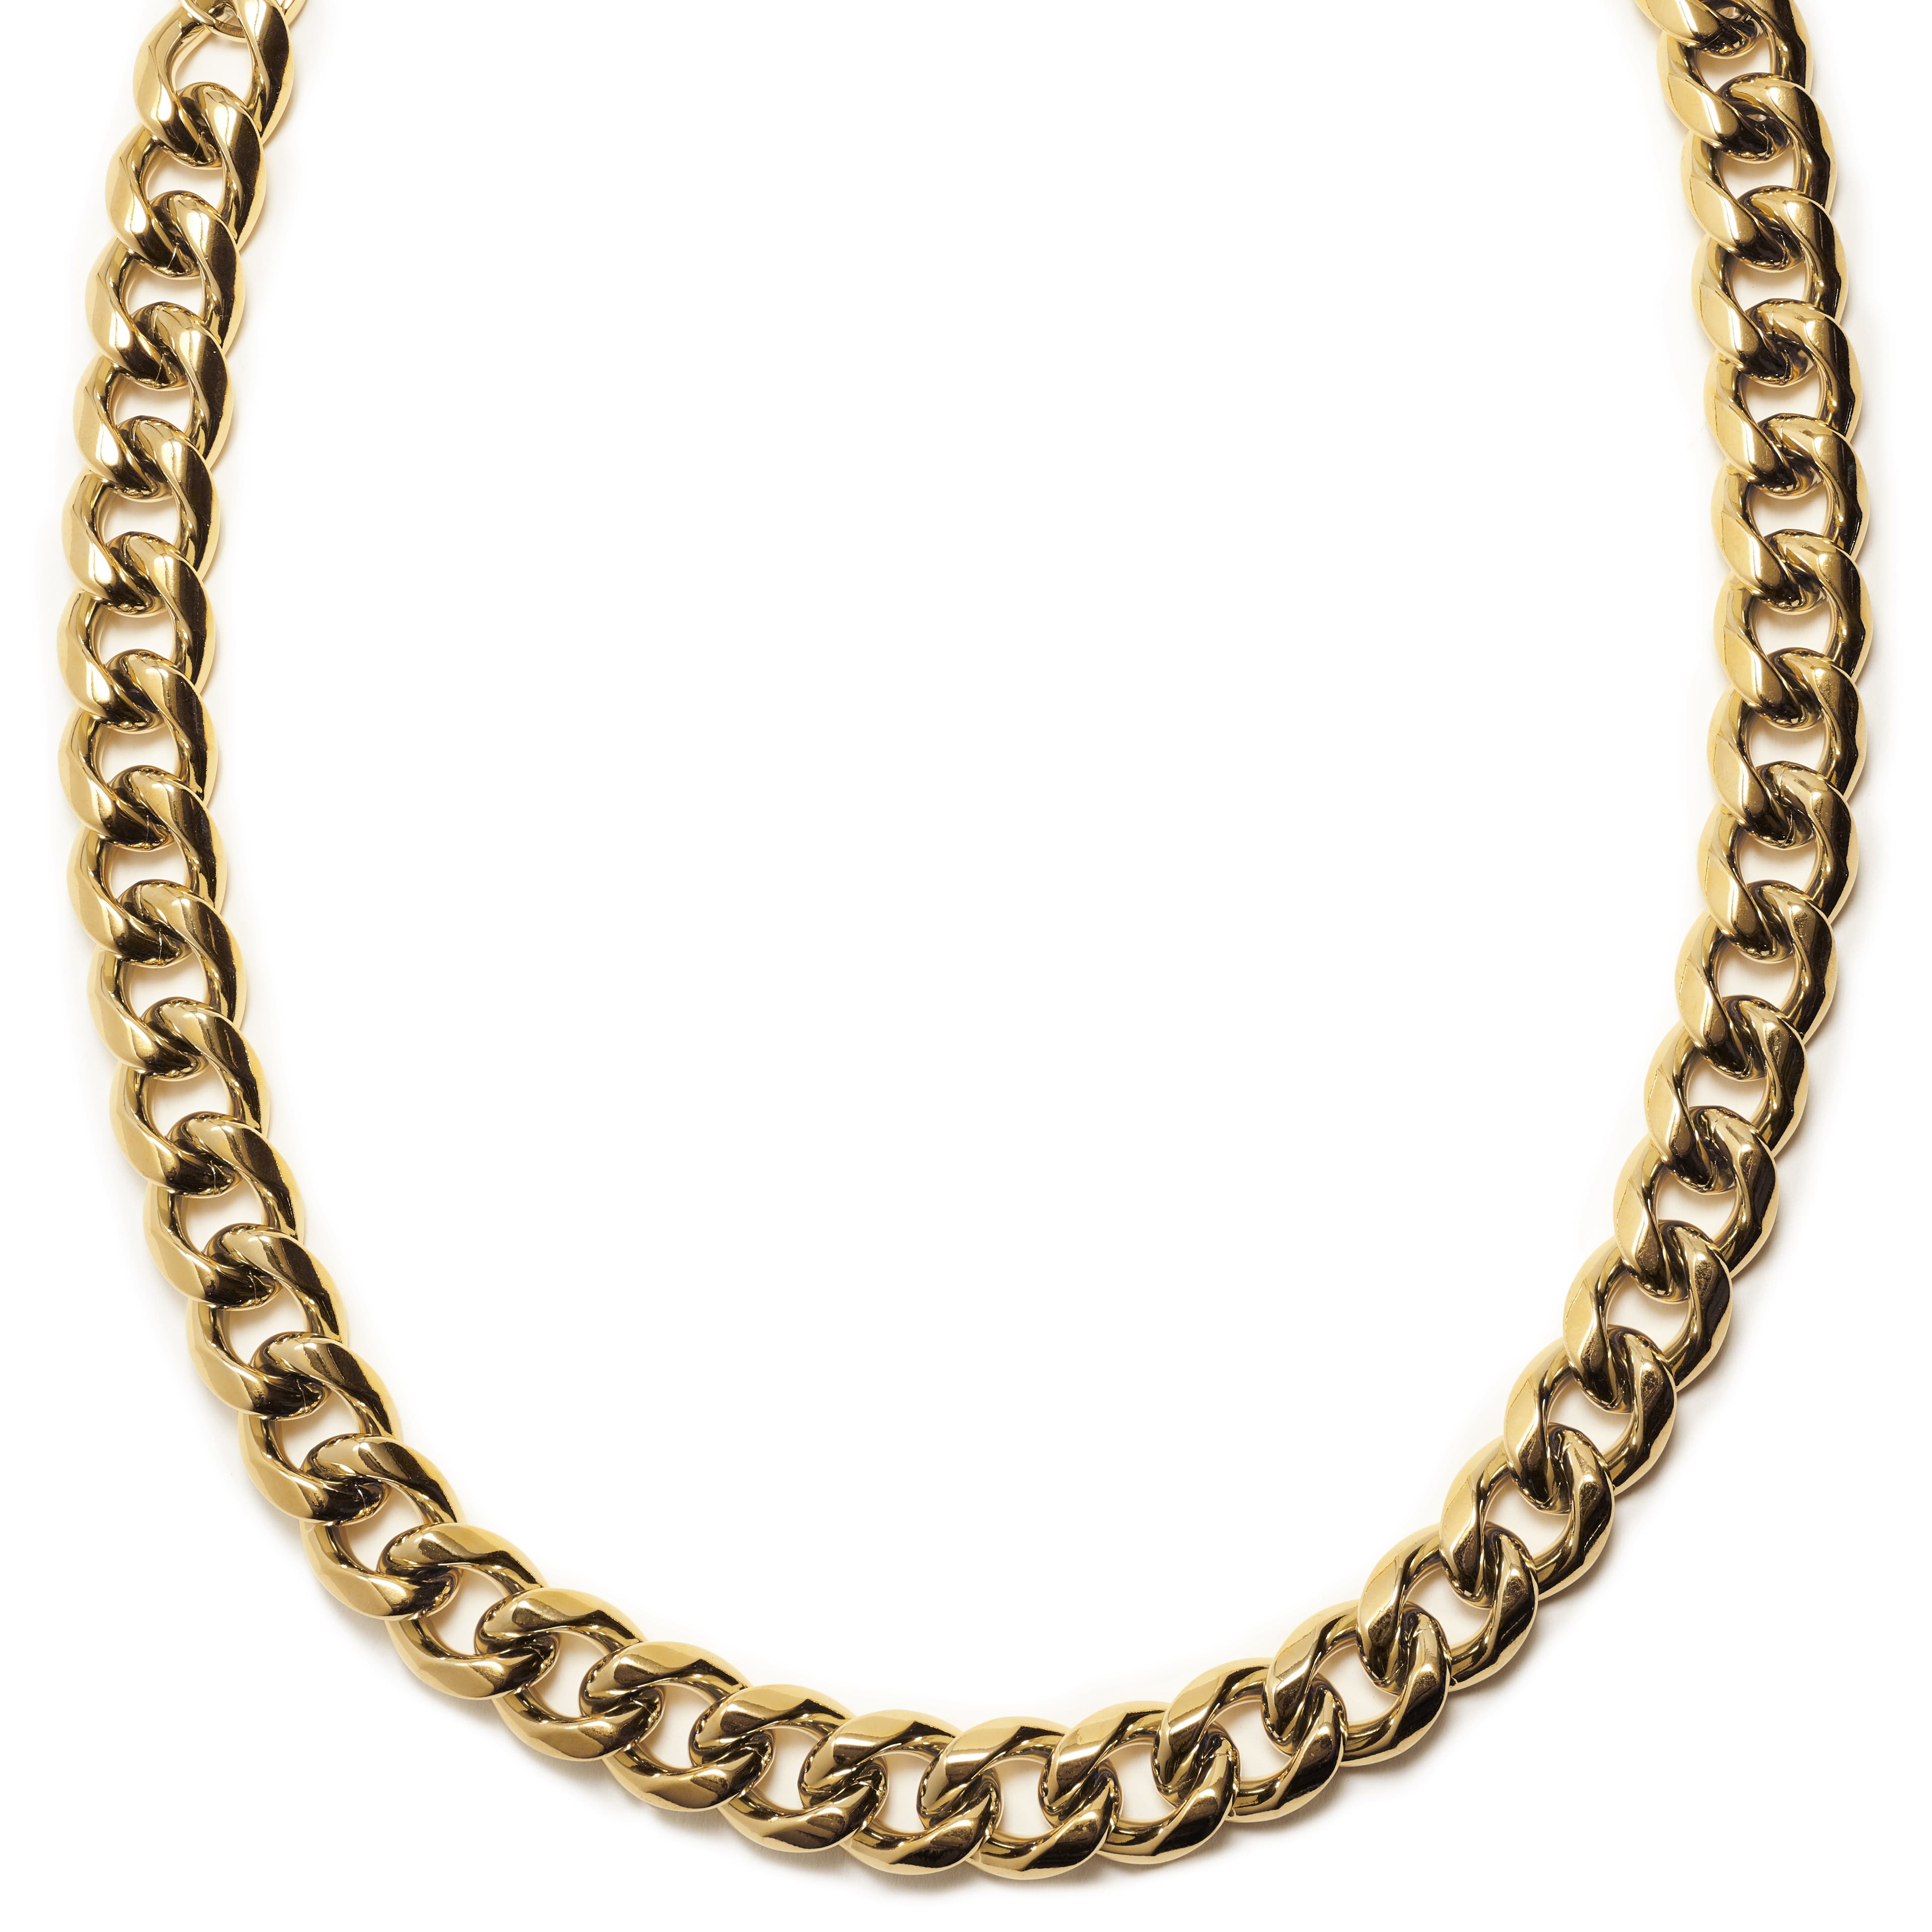 18 mm Gold-Tone Cuban Chain Necklace